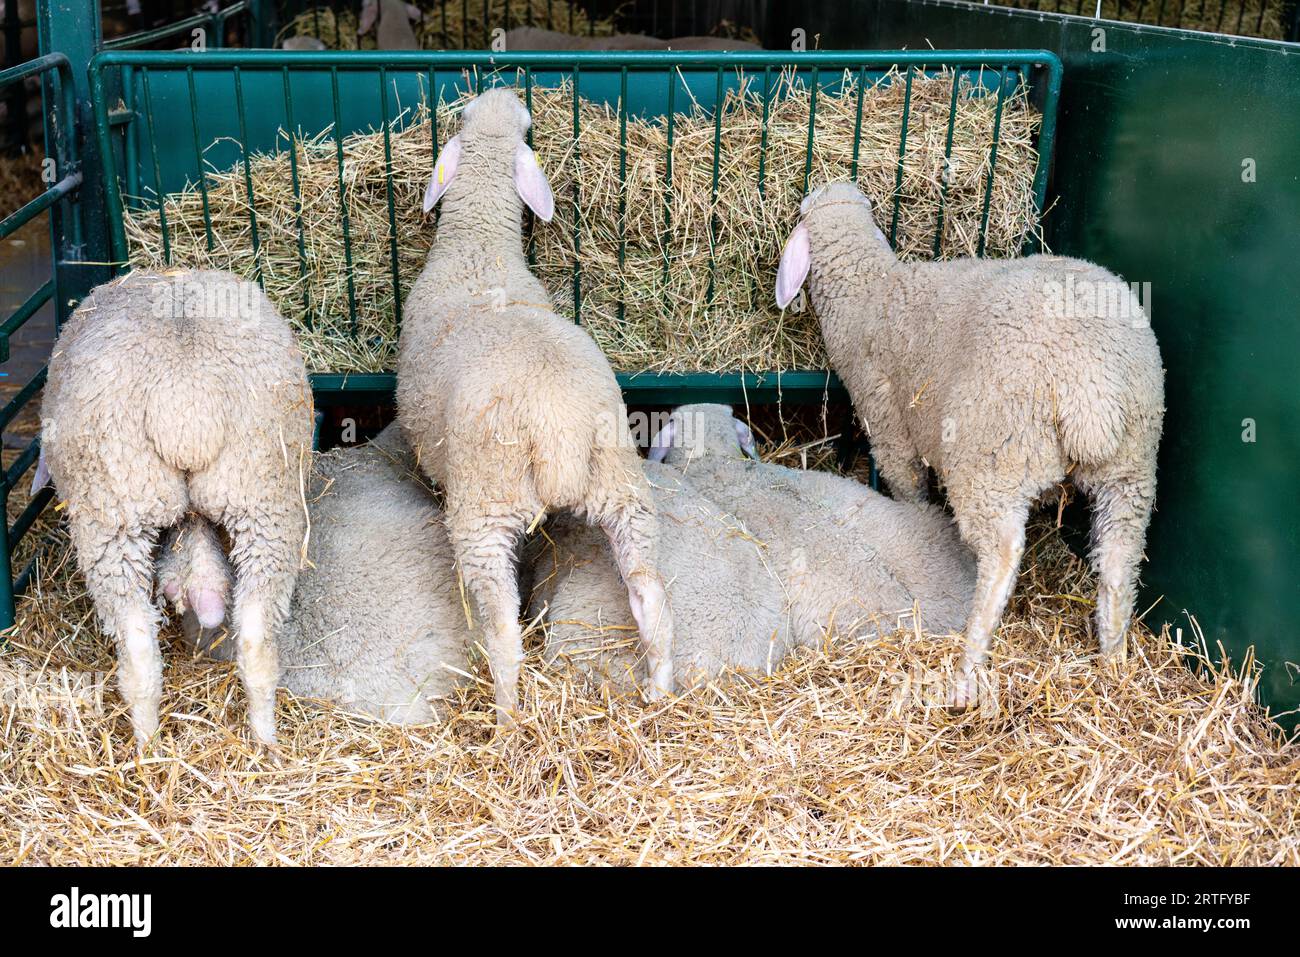 Rear view of sheep eating hay in paddock of livestock farm. Stock Photo